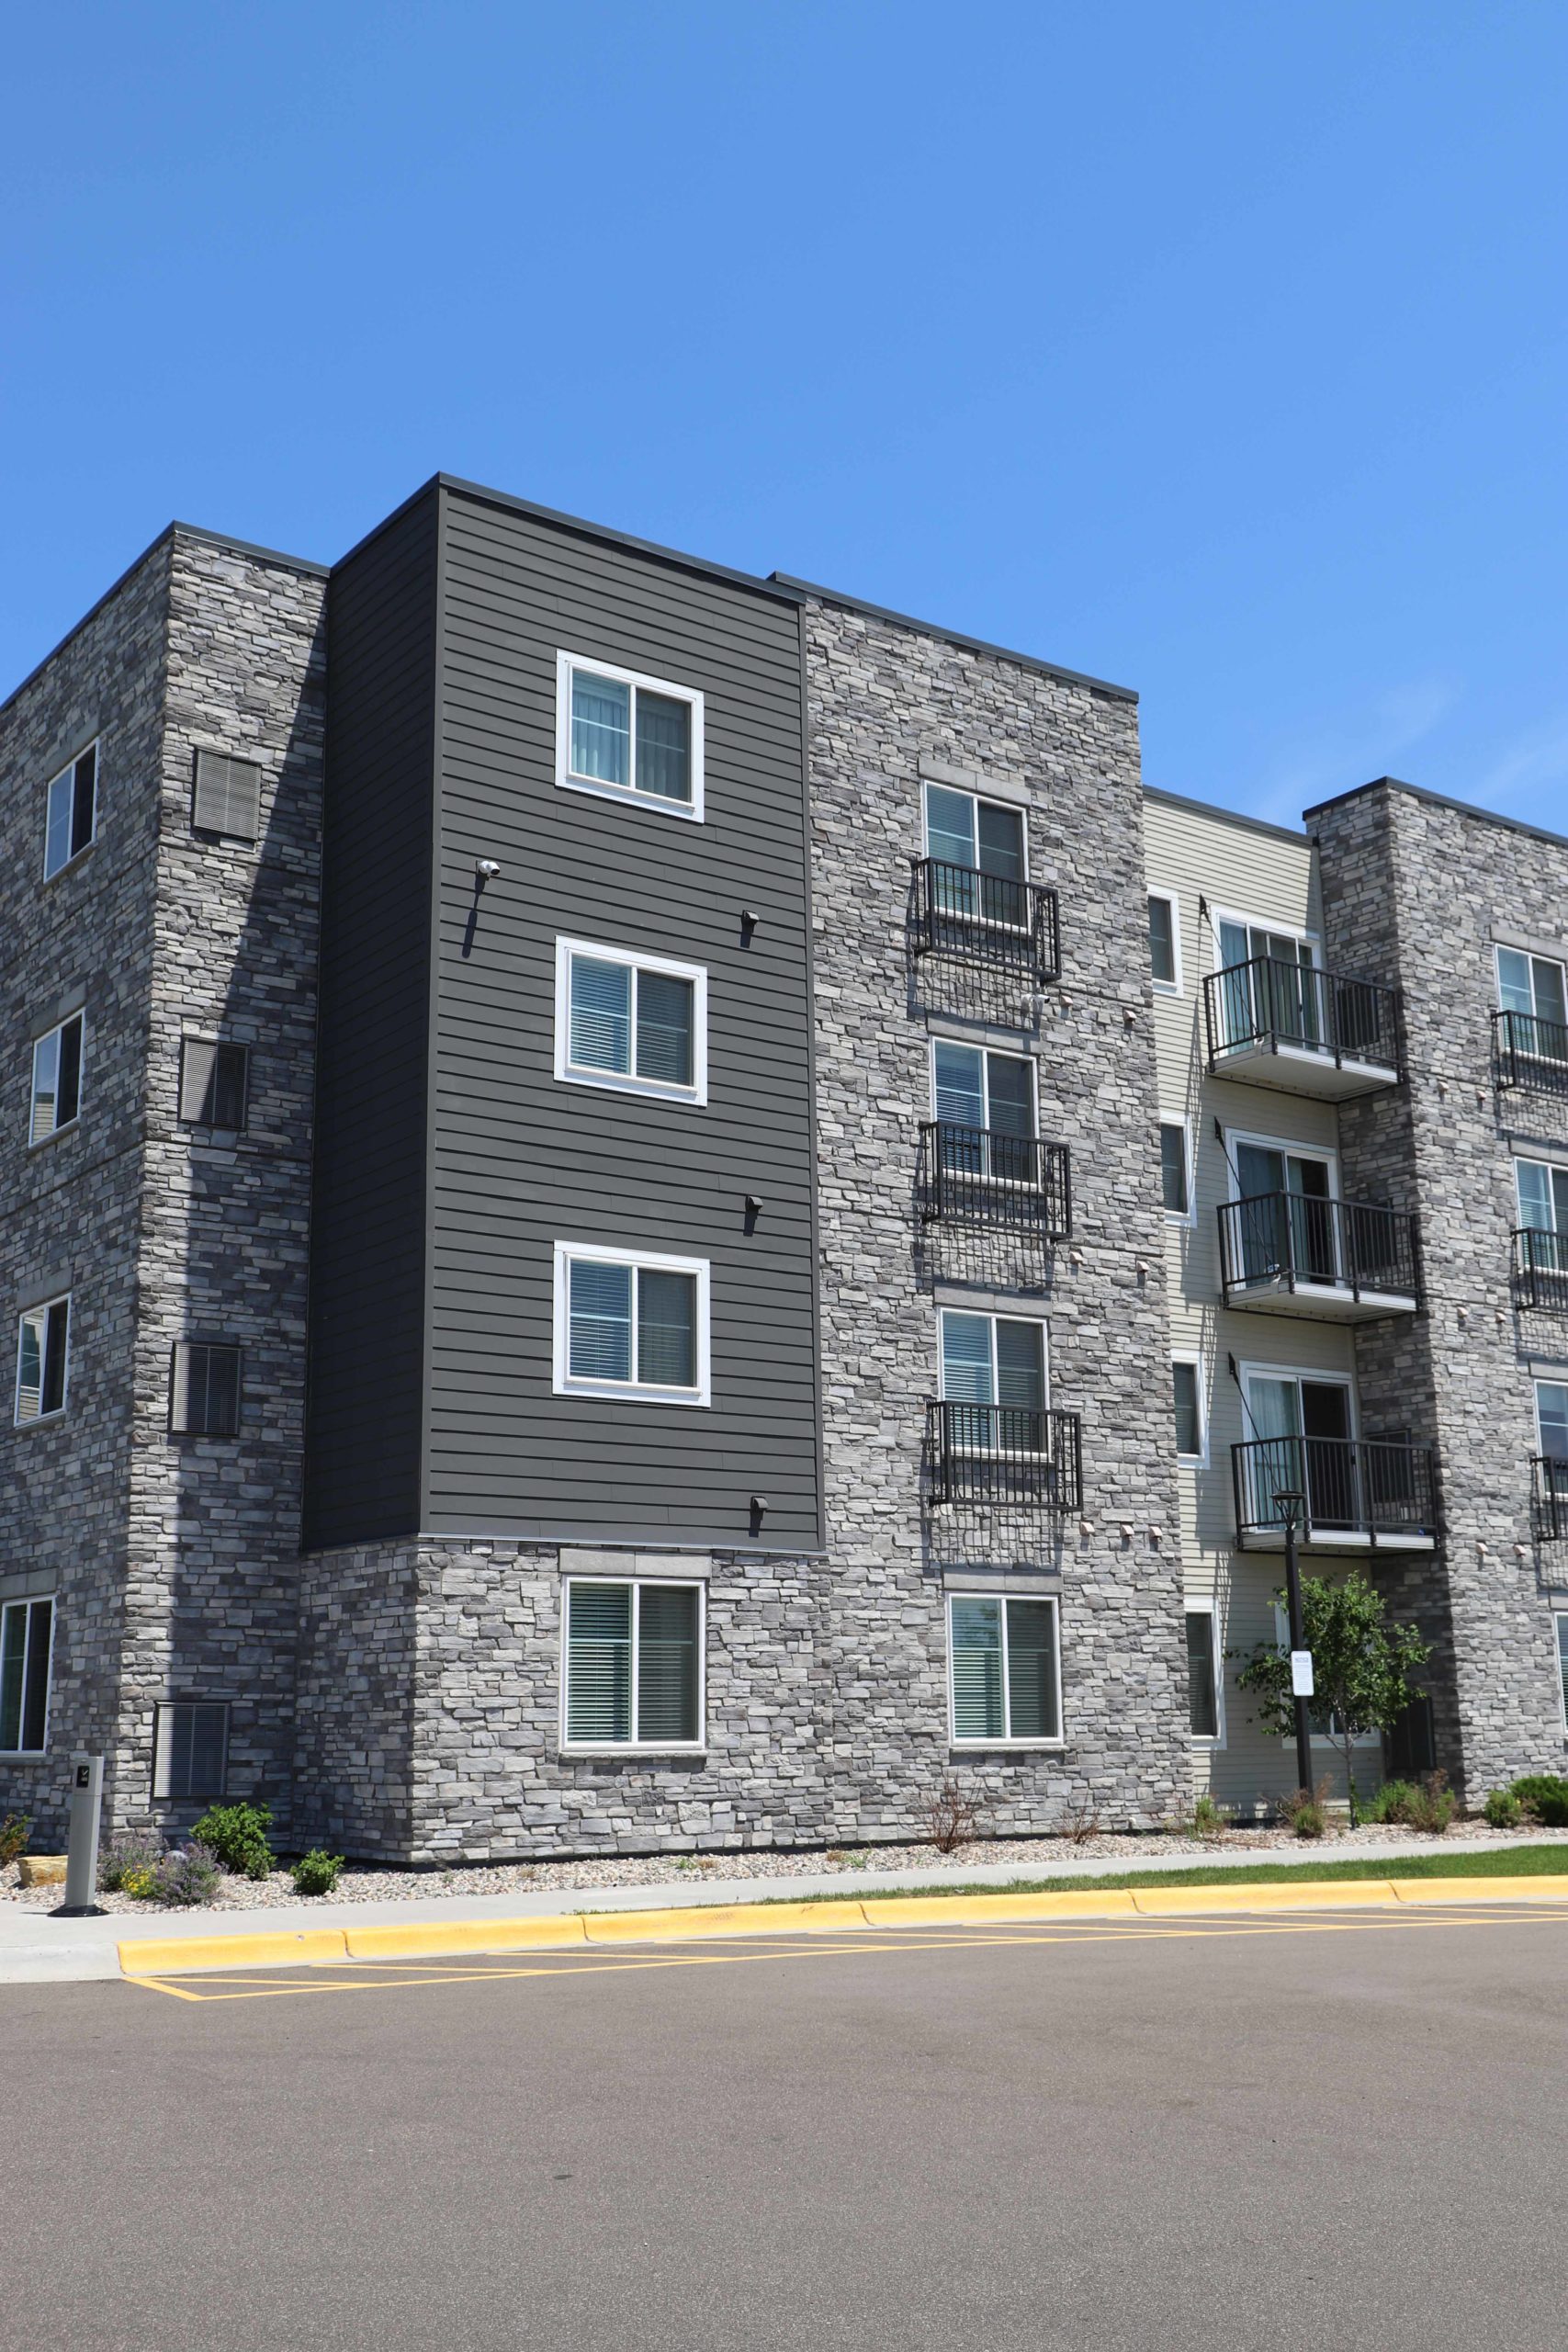 The corner of a four-story apartment building with a dark gray James Hardie Lap siding and stone exterior in Plymouth, MN.